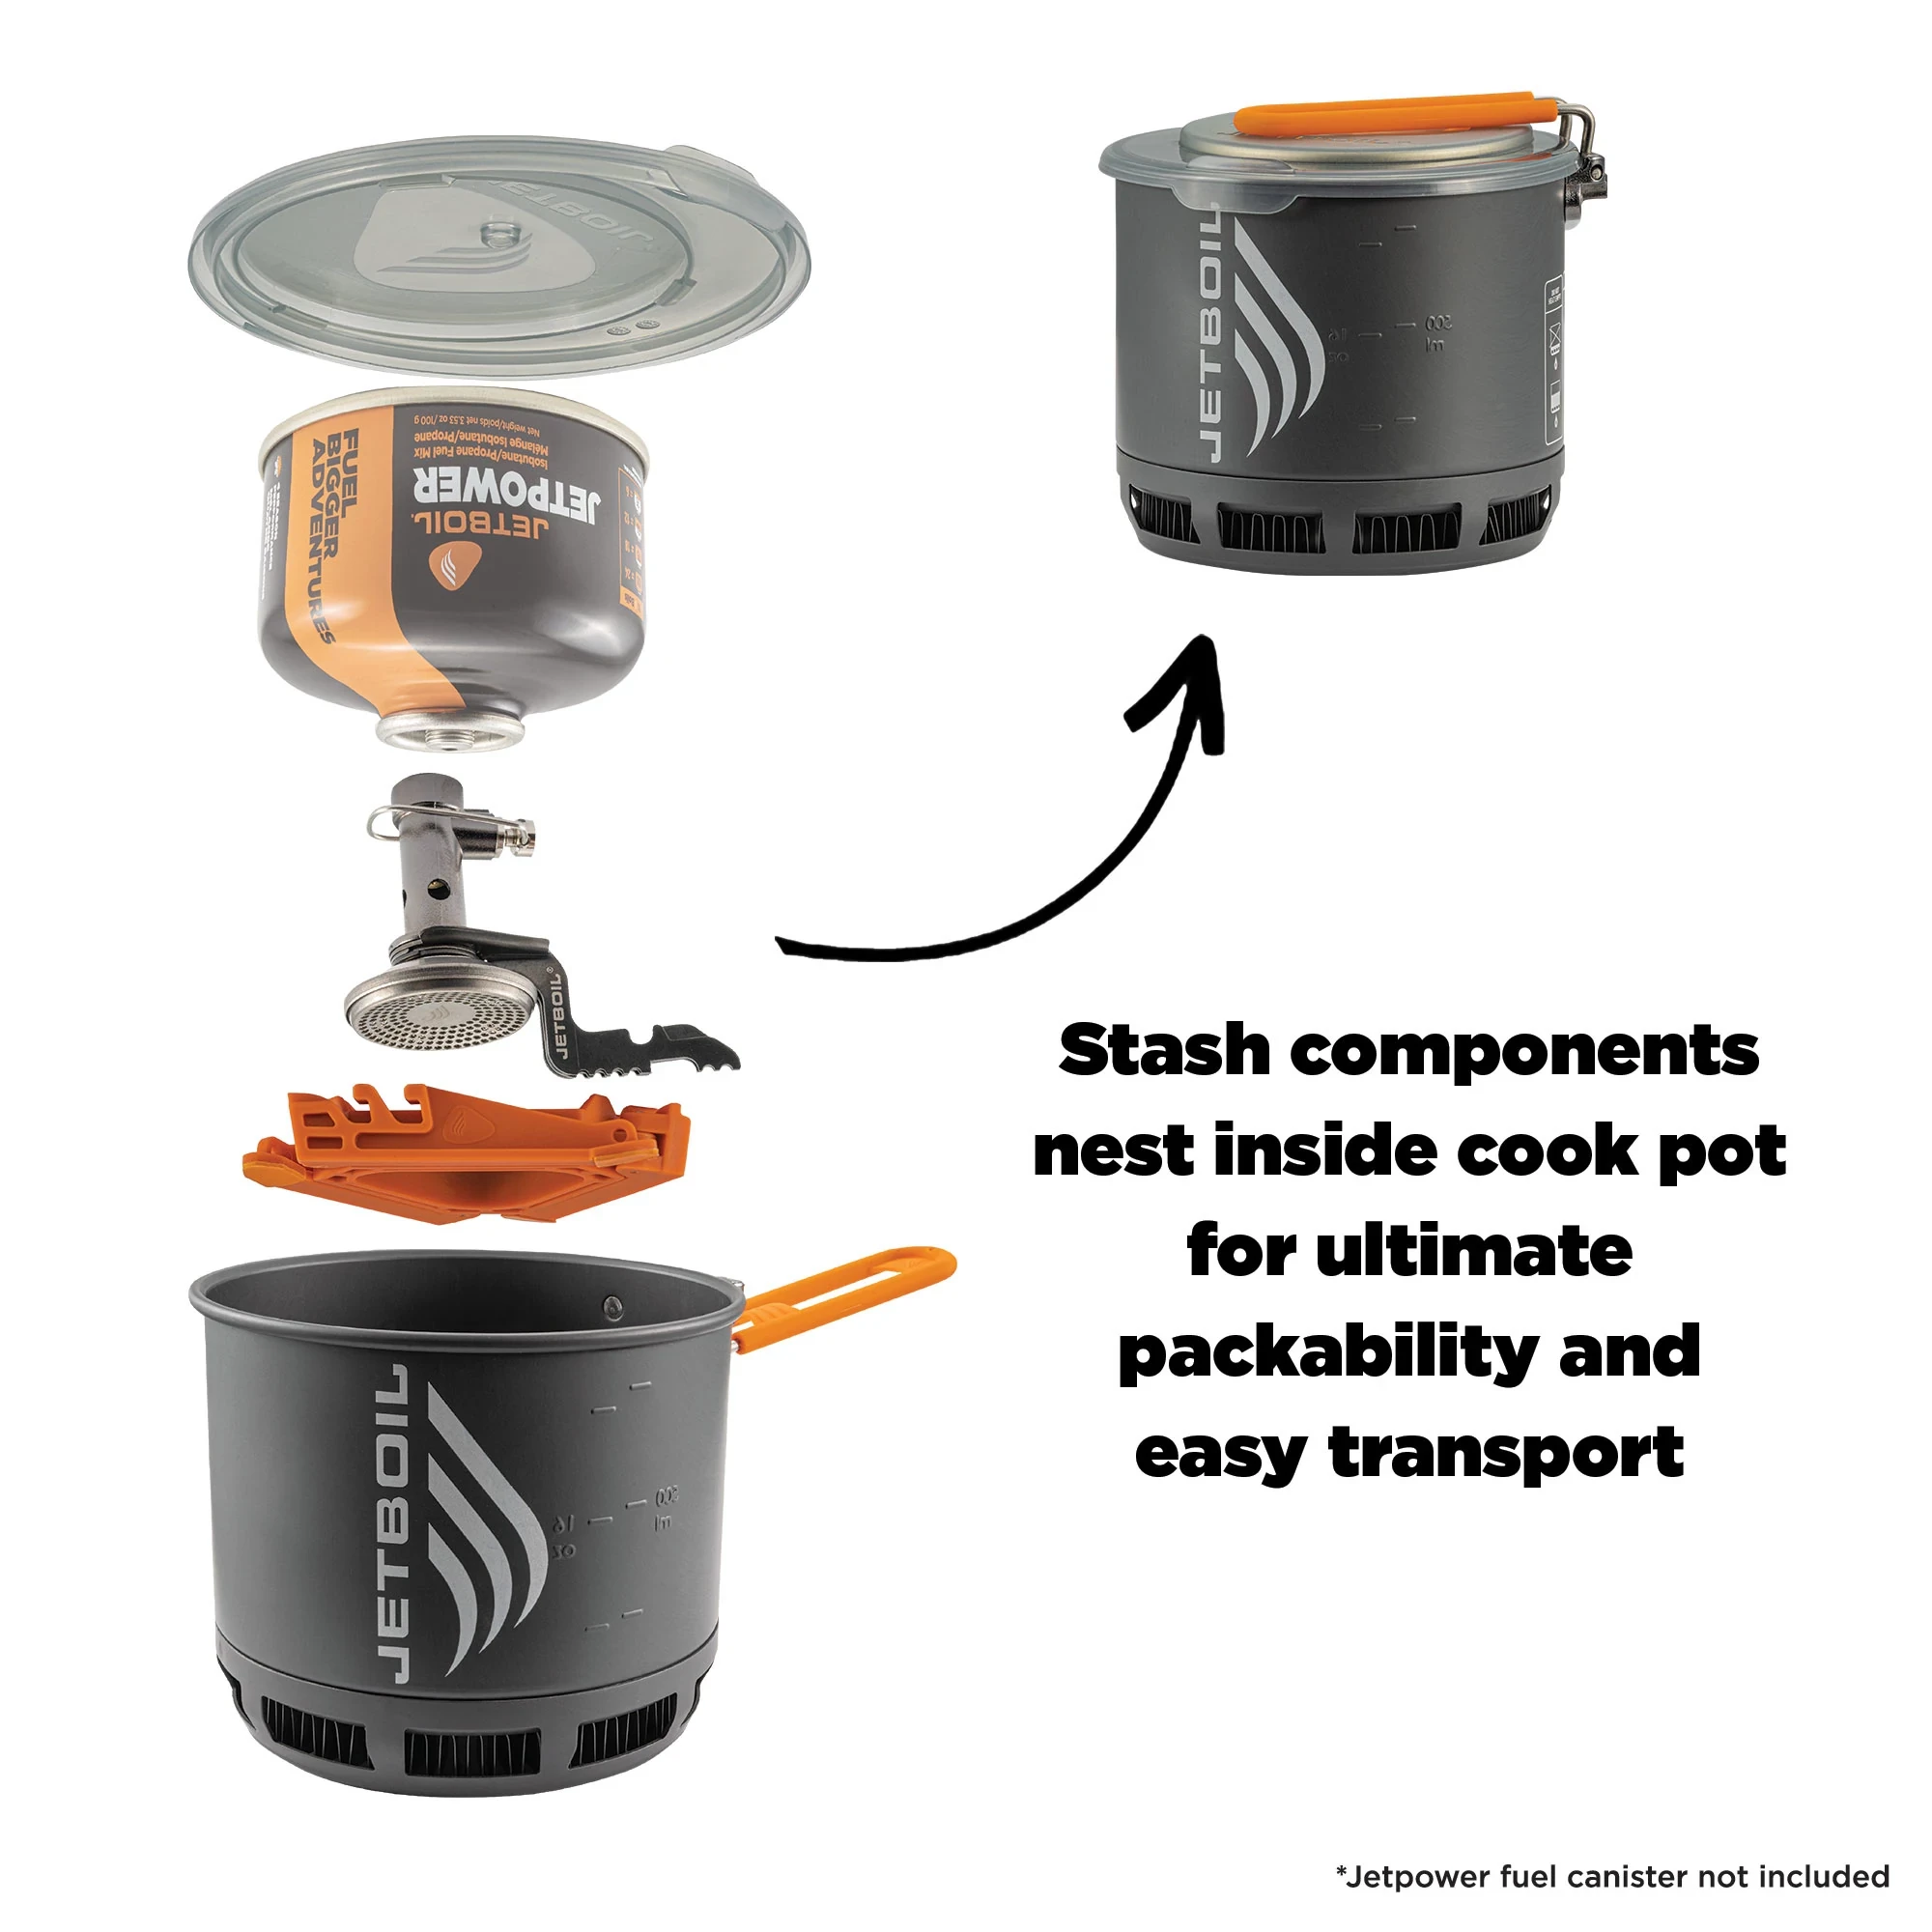 Stash Cooking System